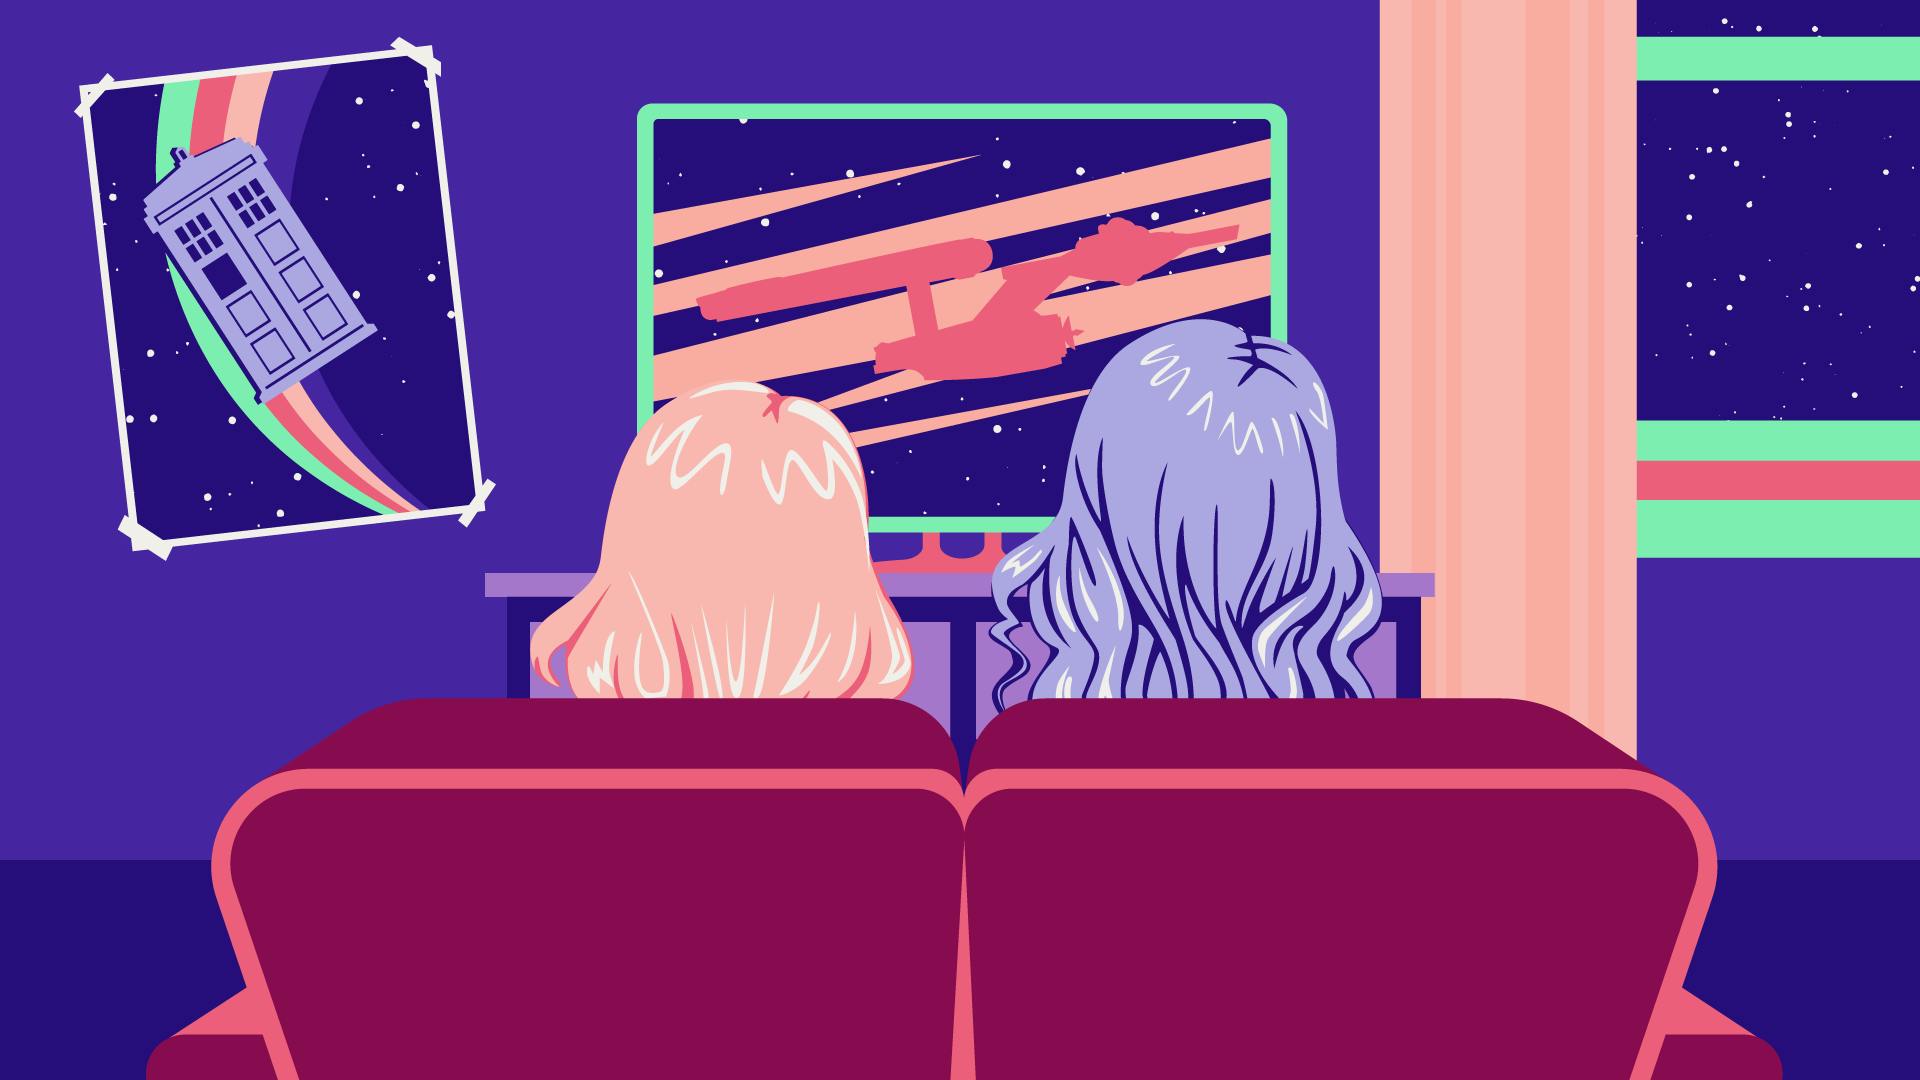 Graphic illustration featuring two friends on a couch watching a tv with a starship on it and a poster of the TARDIS on their wall